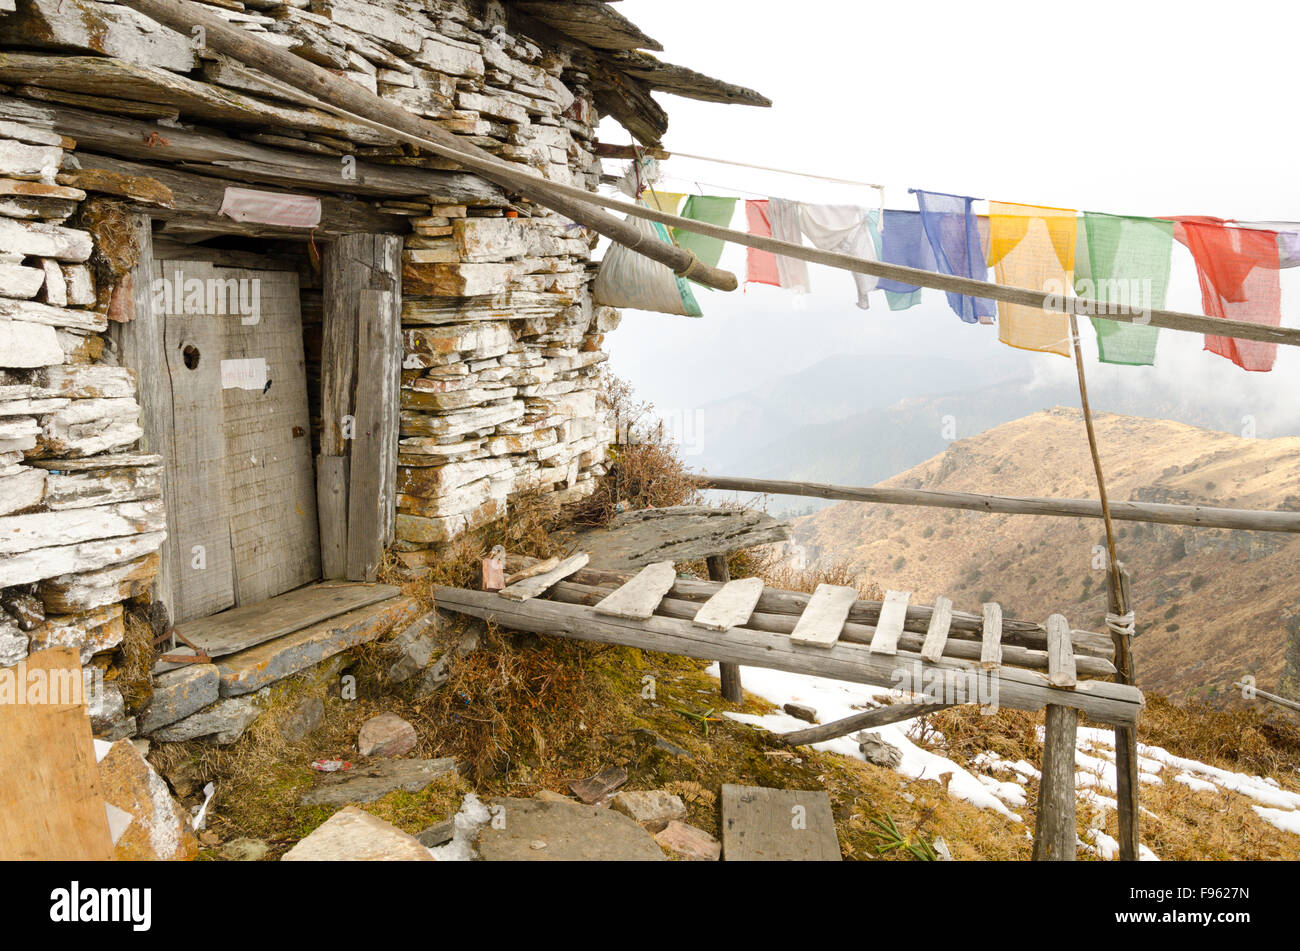 A sky burial monument showing the rack for tying down a human corpse, Bhutan Stock Photo